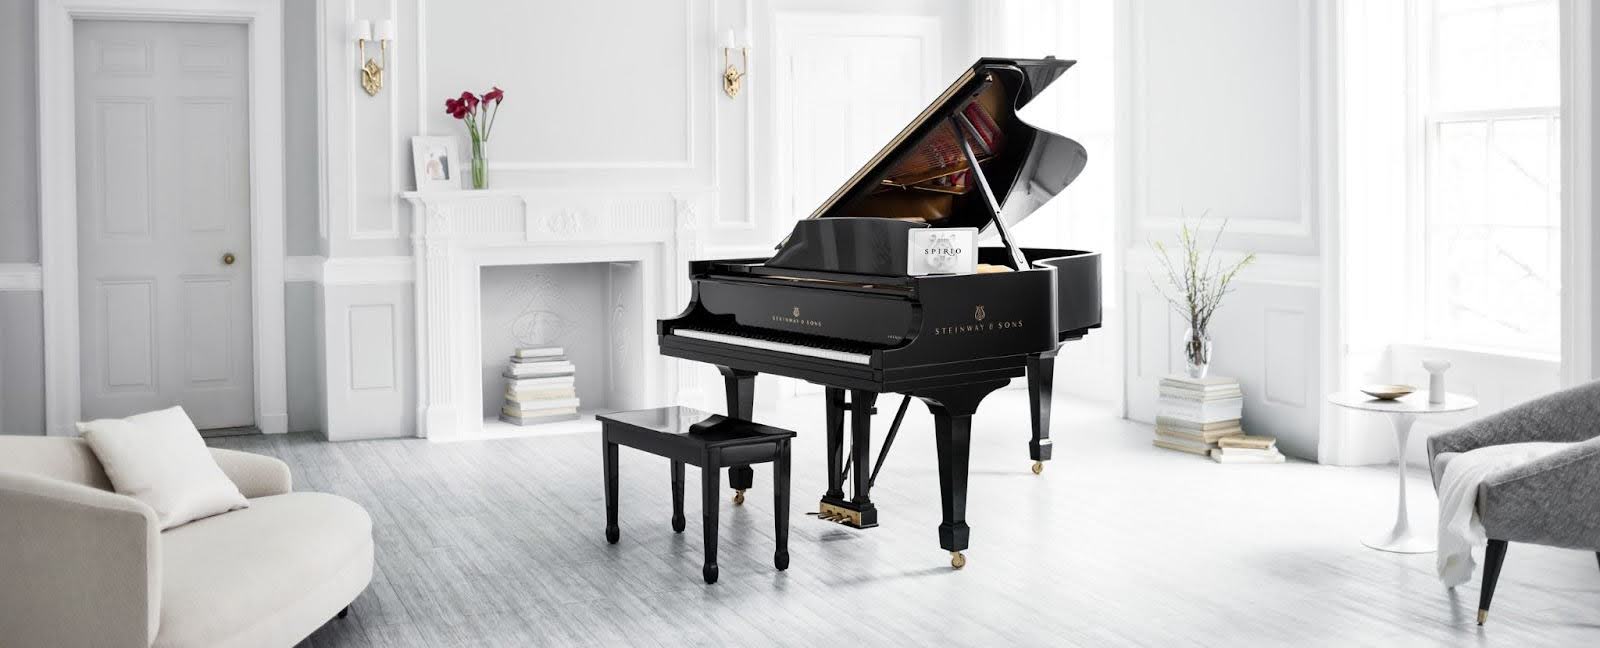 Moving a Piano Long Distance: Challenges and Solutions